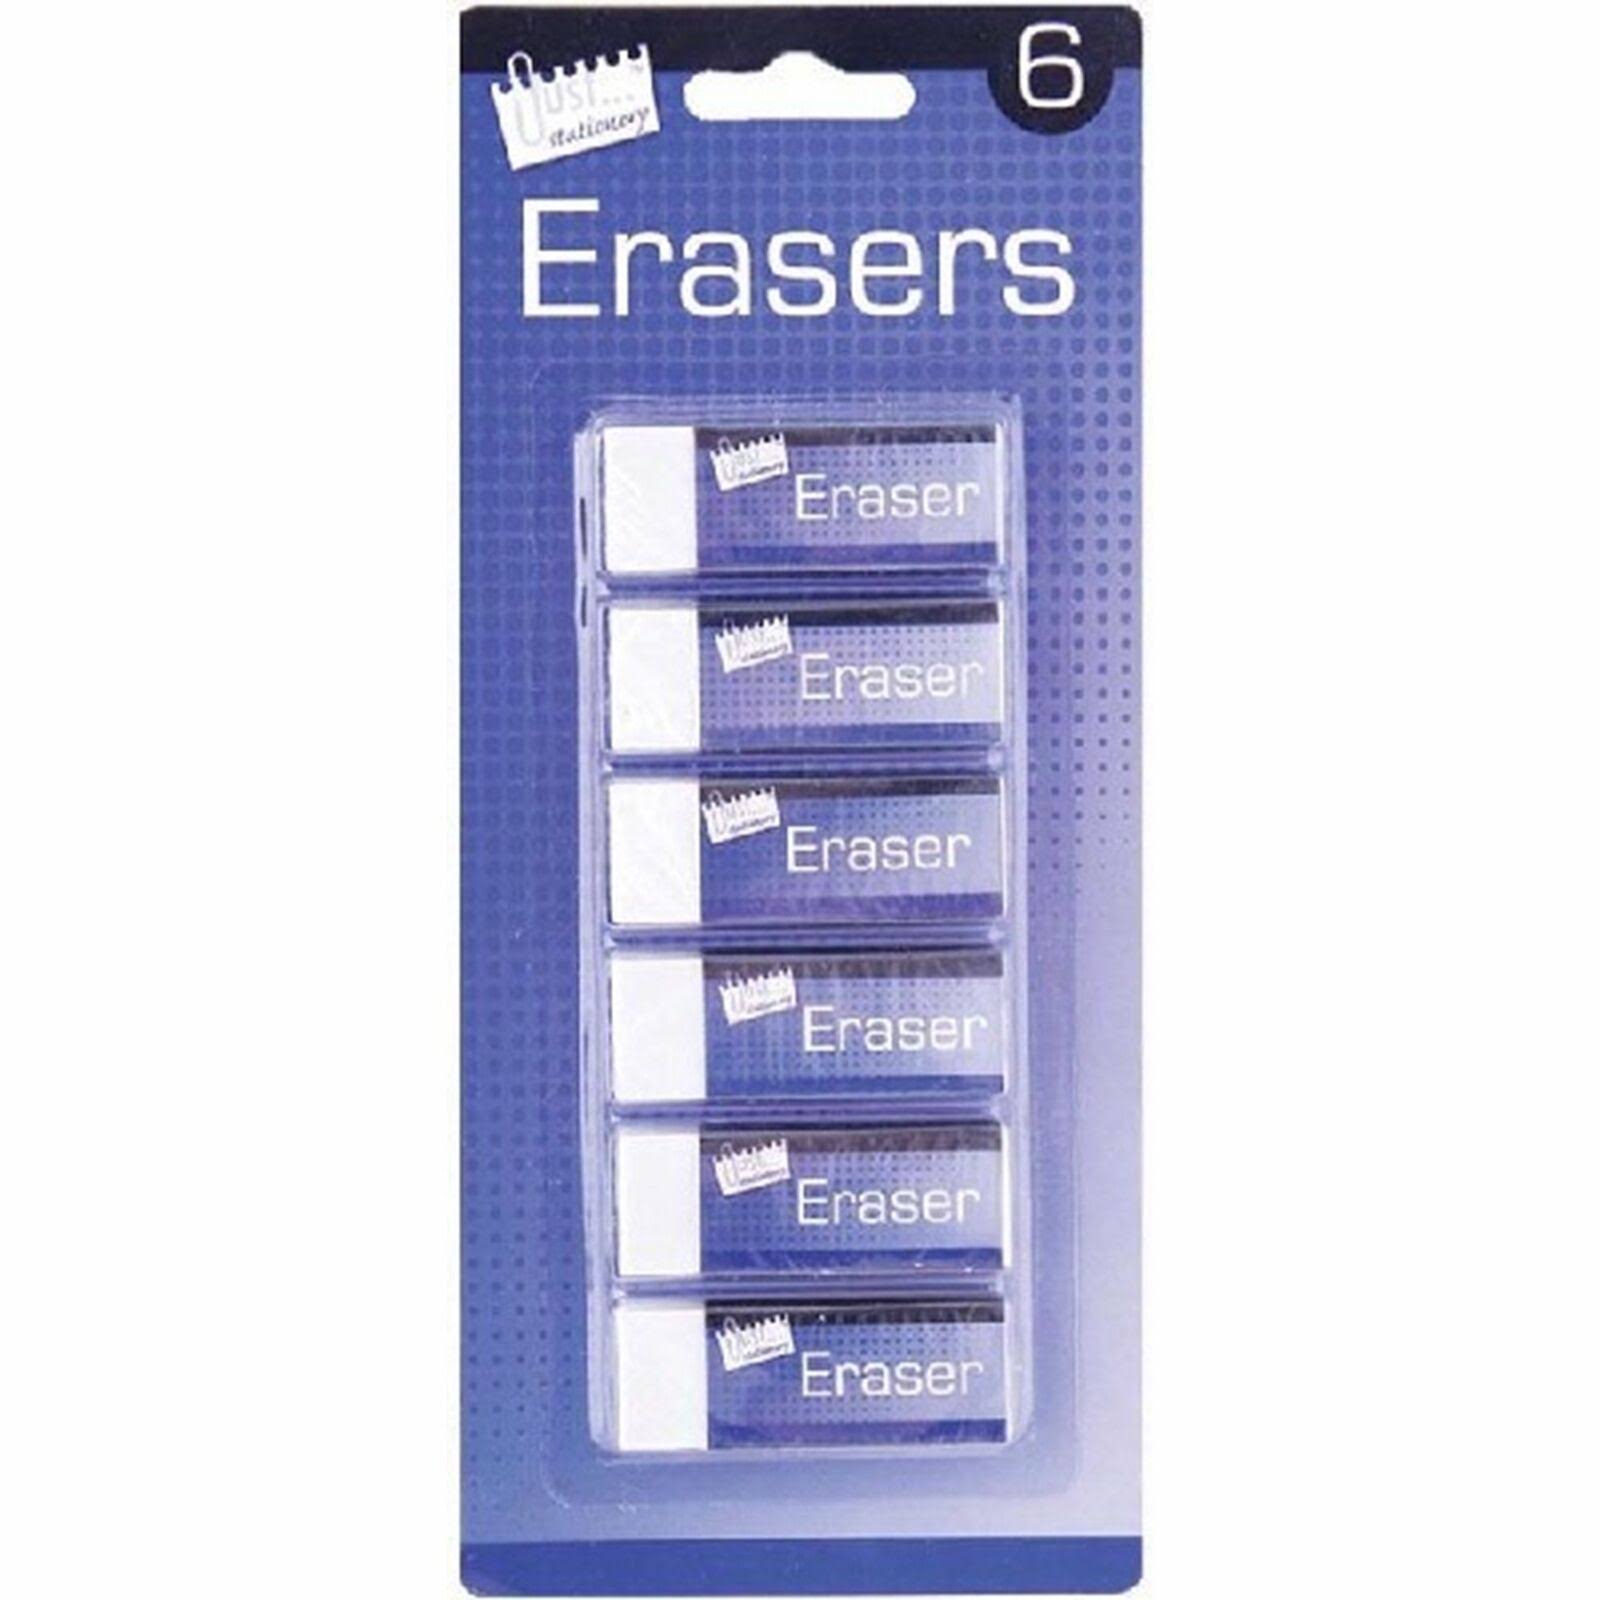 Just Stationery Erasers, White, (Pack of 6)